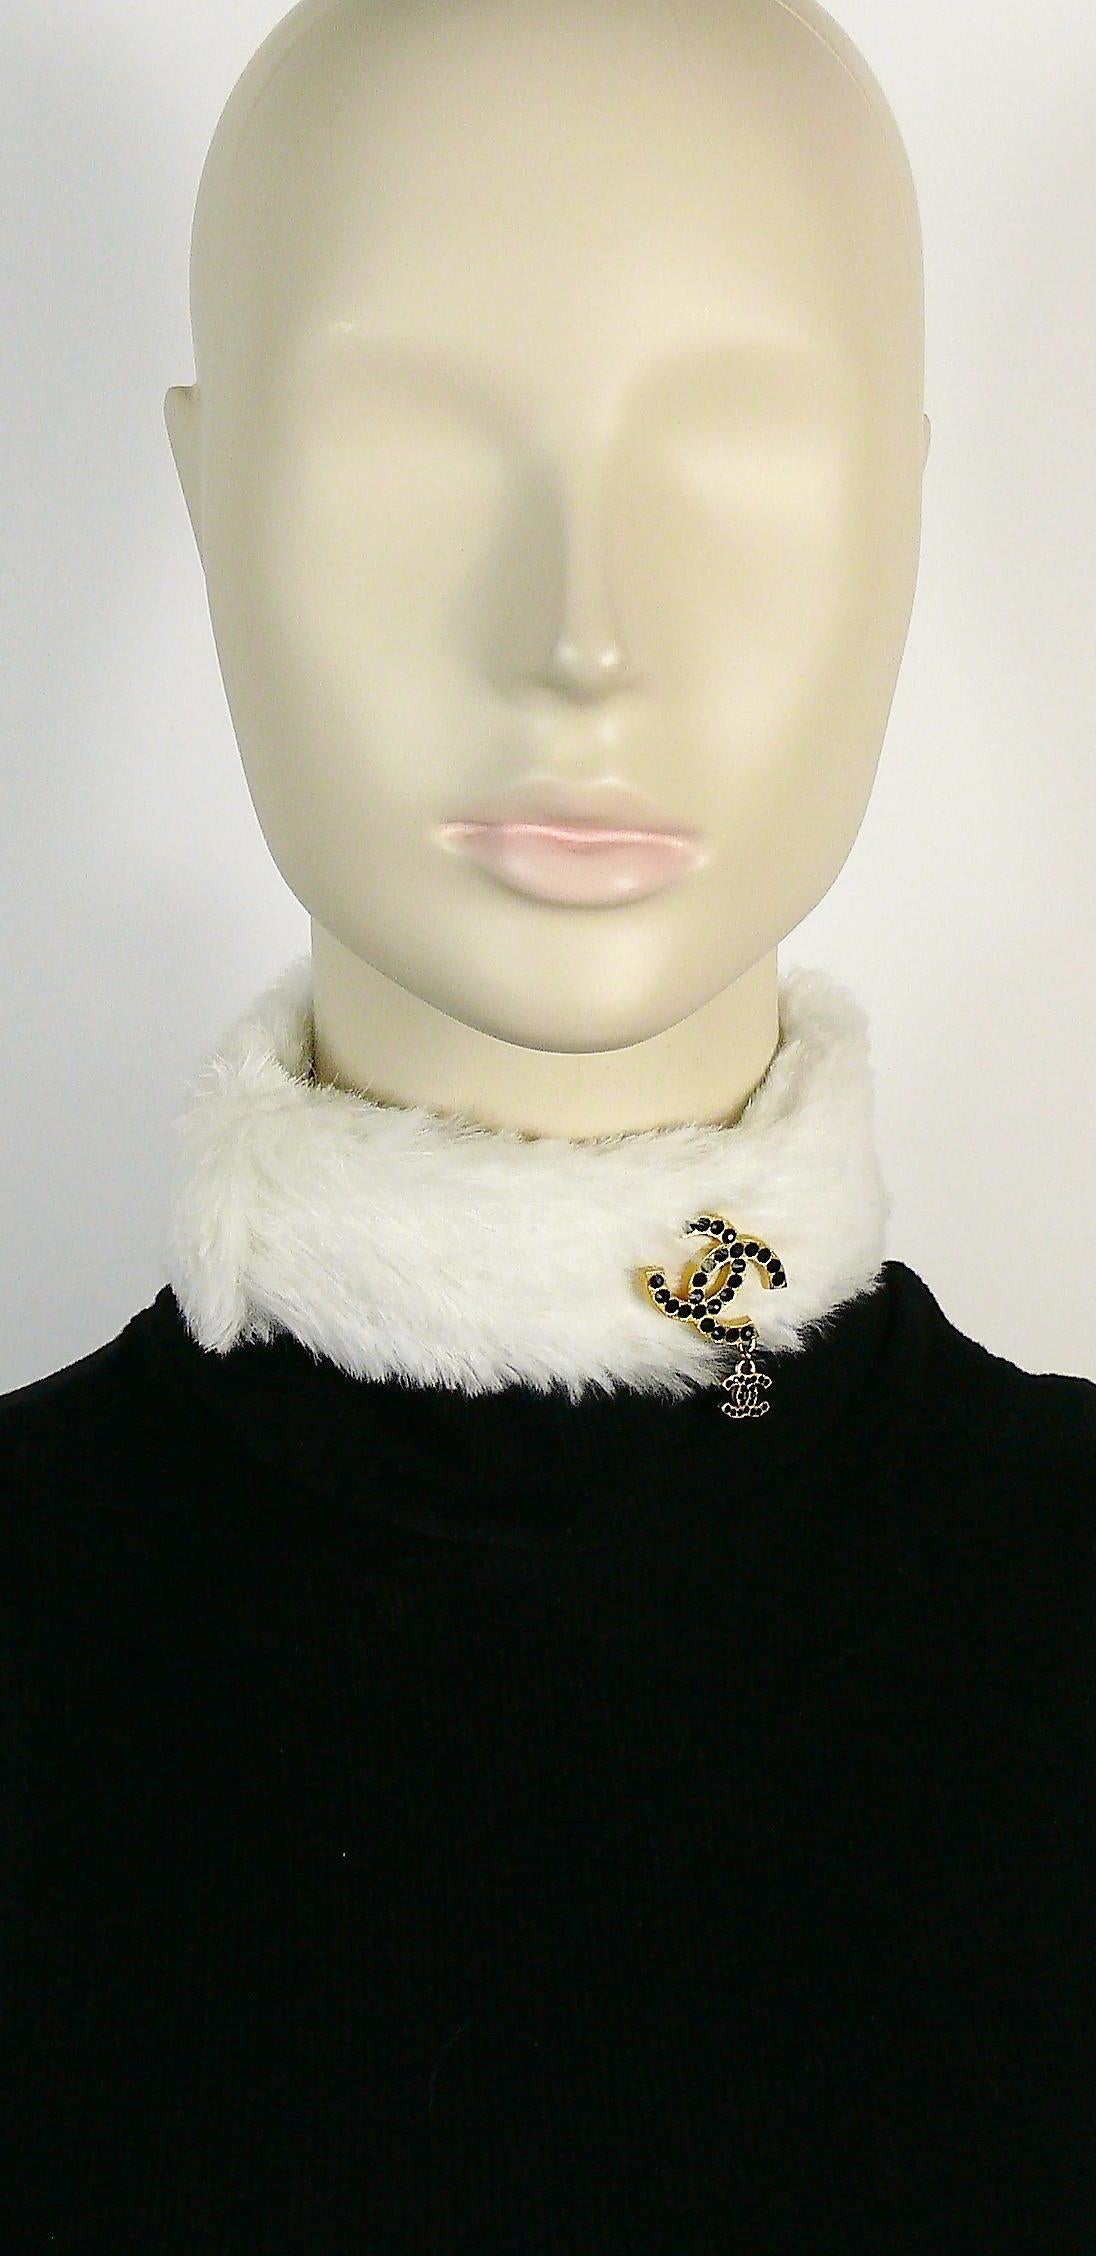 CHANEL white rabbit fur choker necklace featuring CC logos embellished with jet black crystals.

From the Fall/Winter 2001 Collection.
Similar choker (with a different brooch) shown on photo #4.

Jewelled hook clasp.
Adjustable length.

Embossed